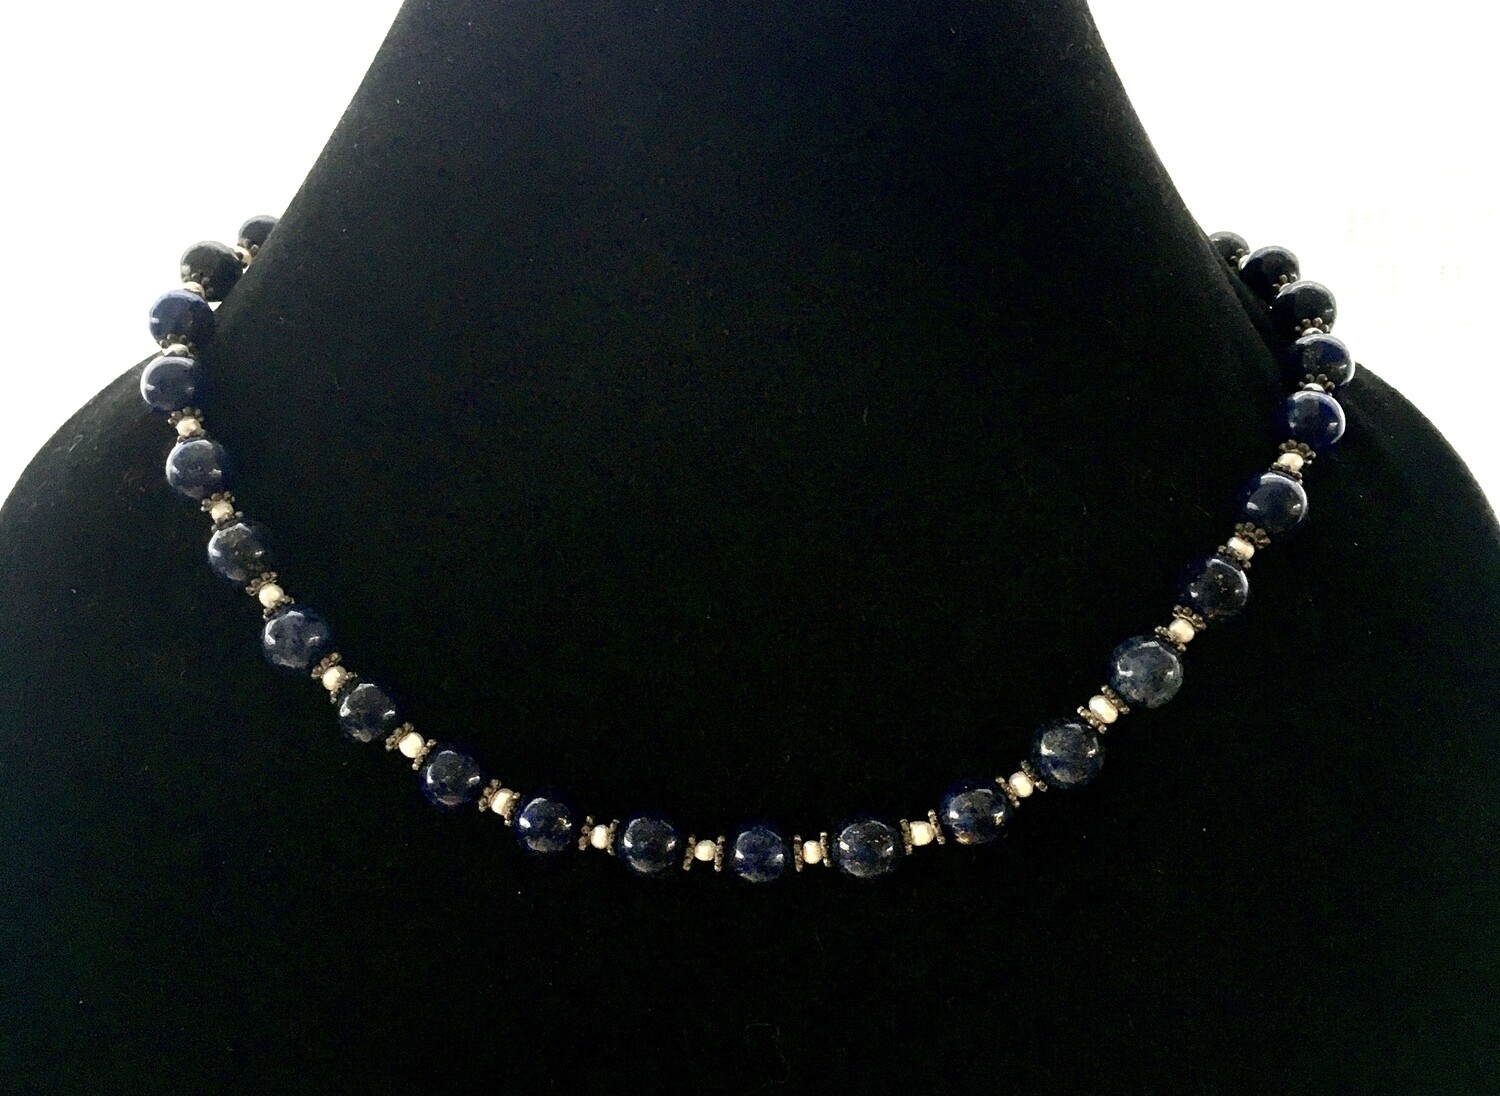 Prussian blue and Pearl beads necklace